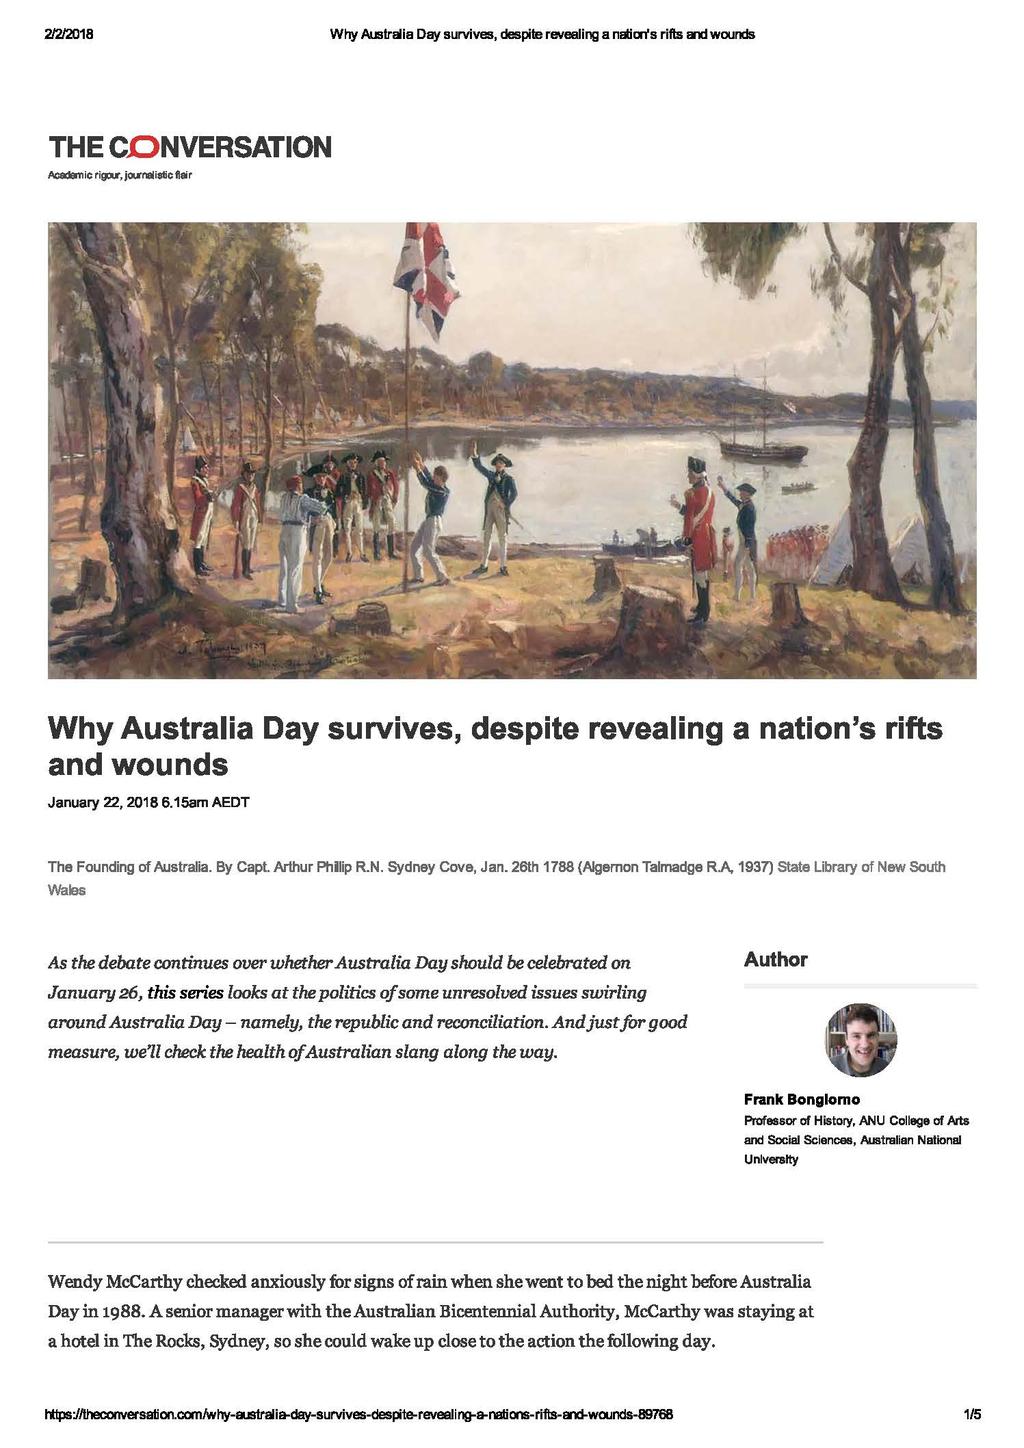 2/2/2018 W'rrf Australia Day survives, despite revealing a nsicrts rifts and wounds THE CO NVERSATION Why Australia Day survives, despite revealing a nation's rifts and wounds January 22, 20186.